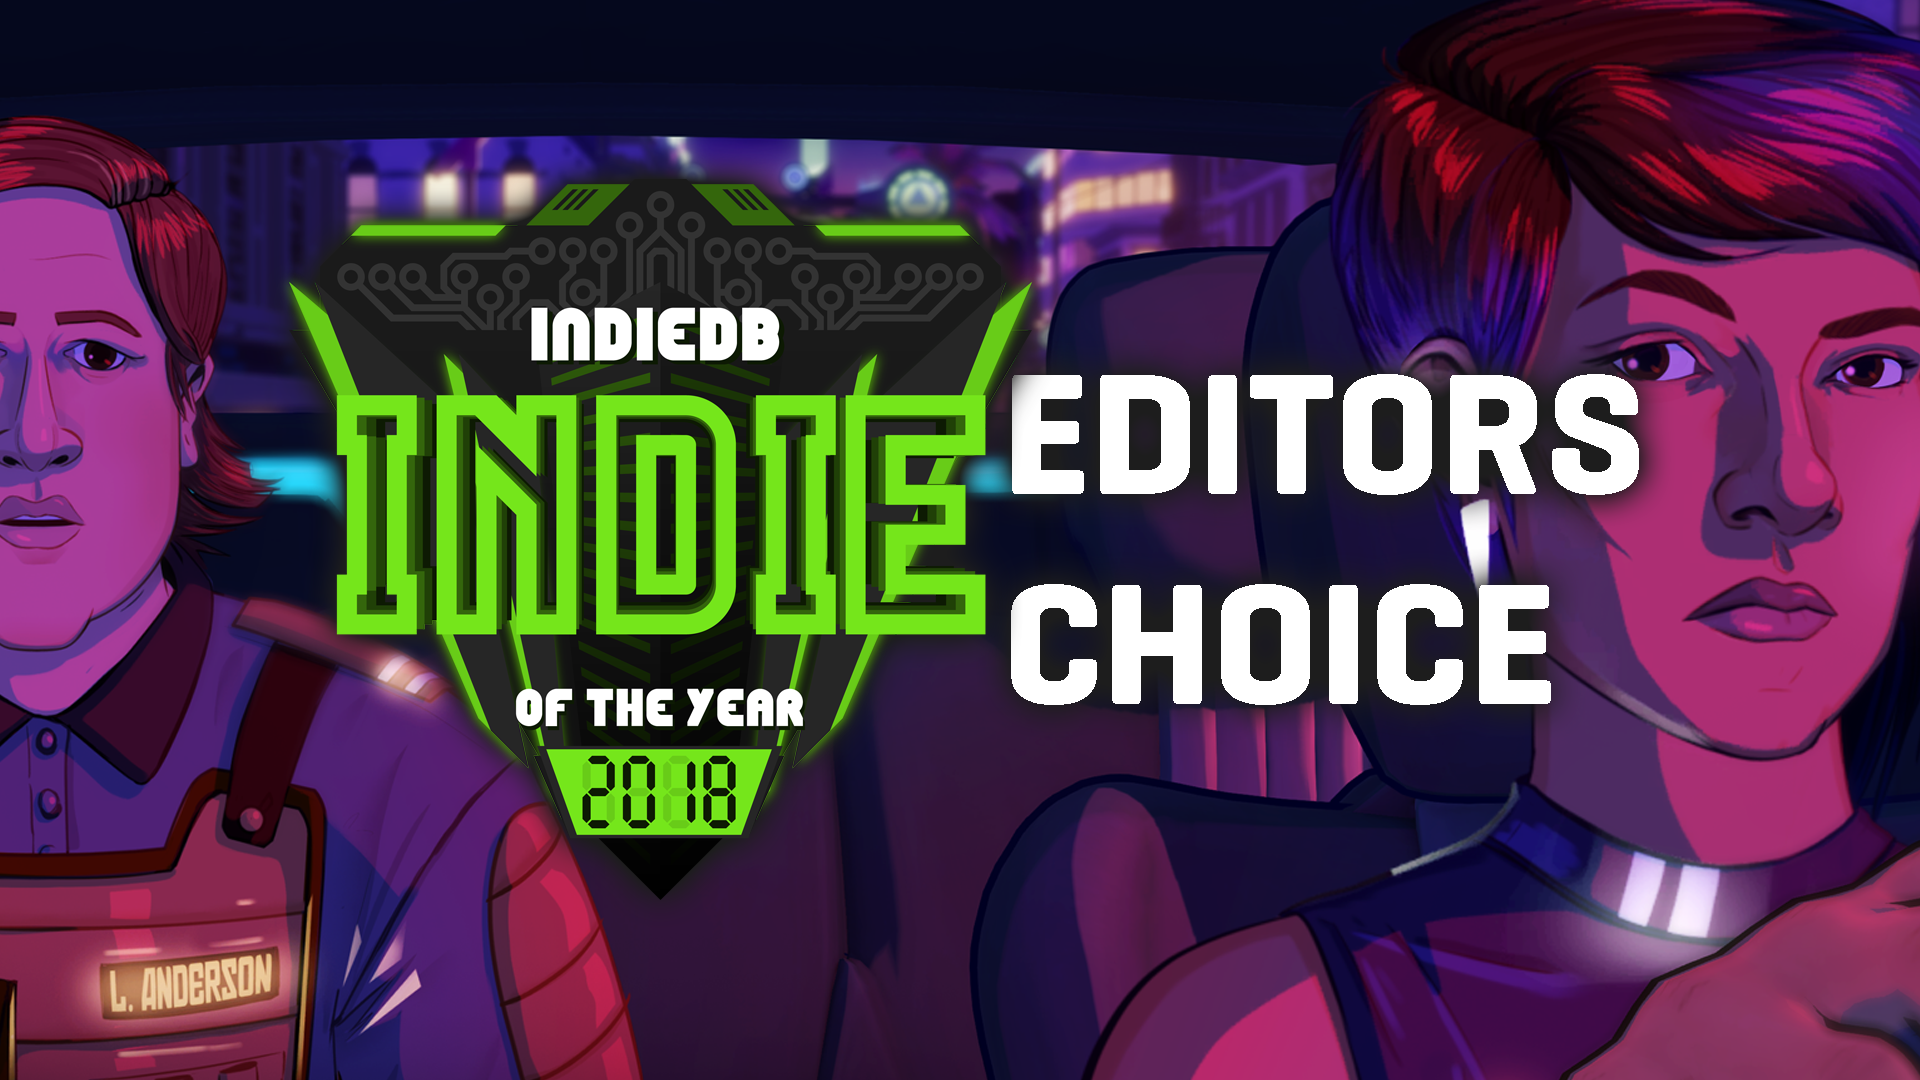 Players Choice Indie of the Year 2016 feature - IndieDB